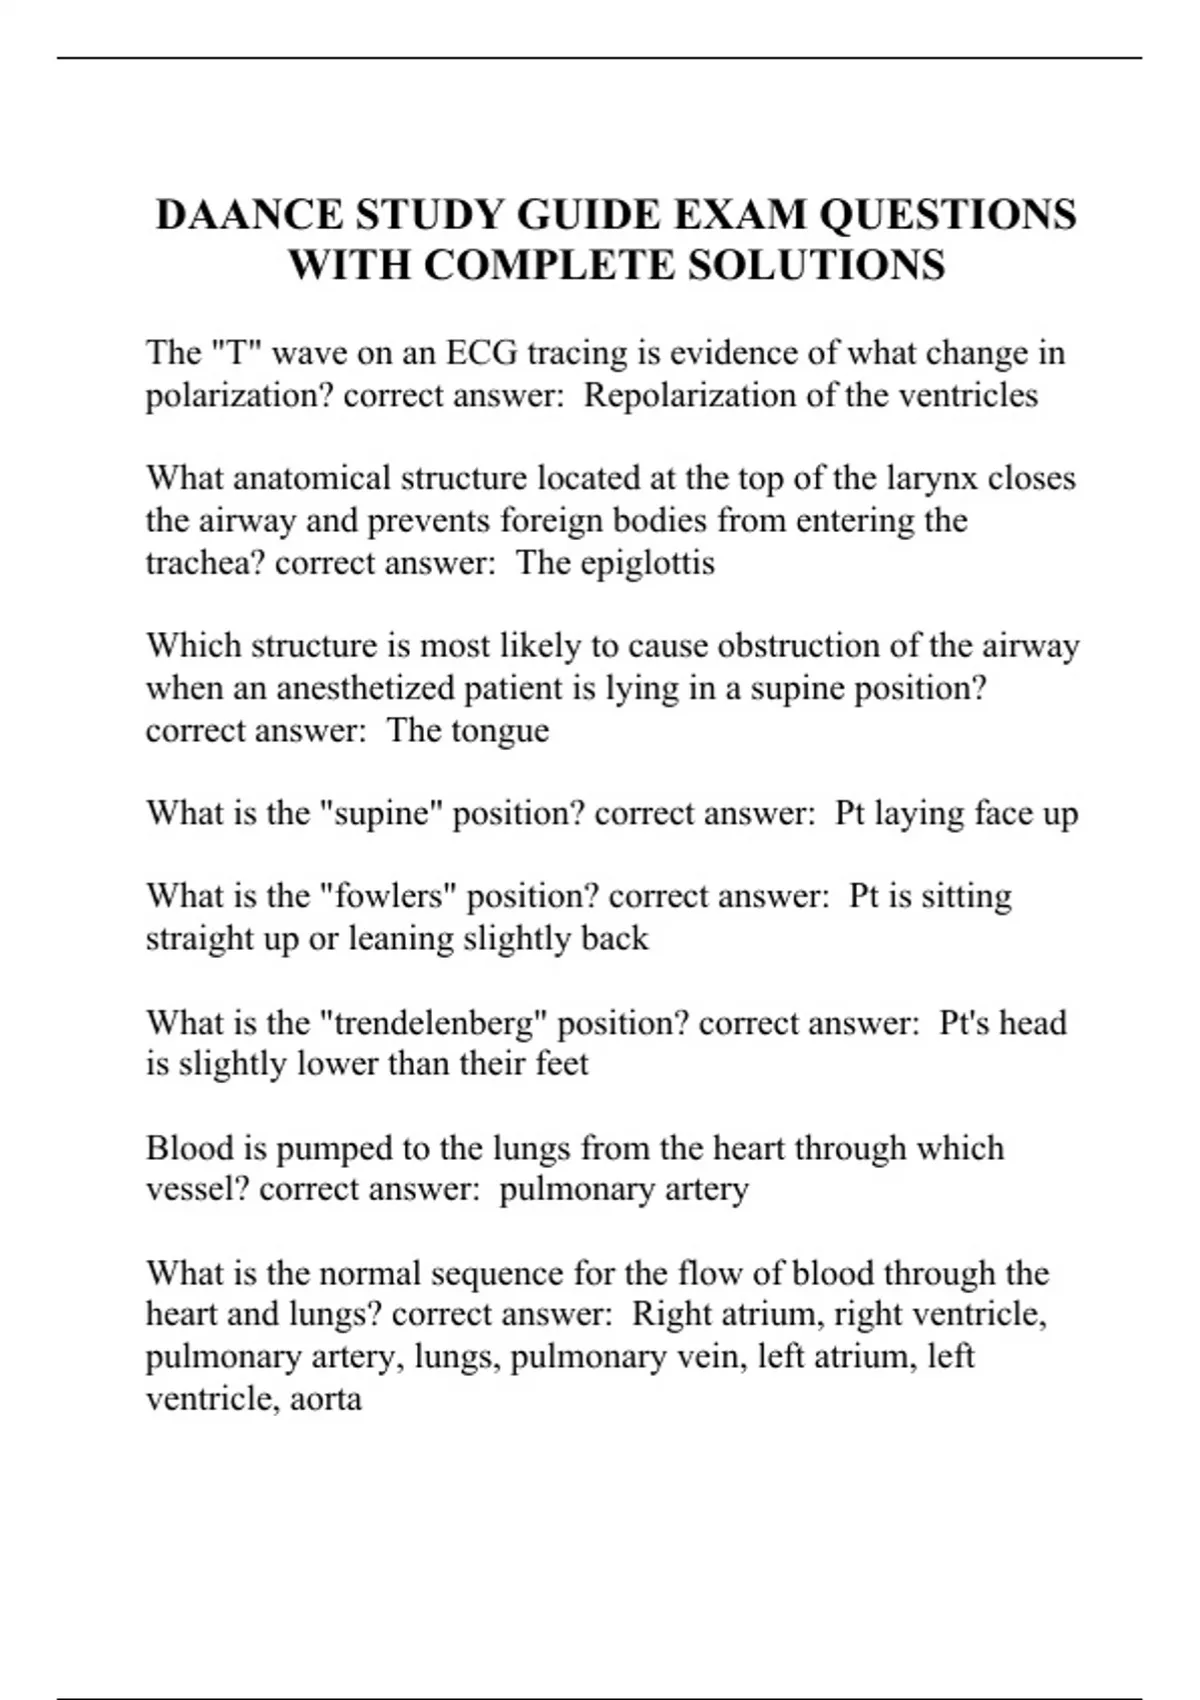 DAANCE STUDY GUIDE EXAM QUESTIONS WITH COMPLETE SOLUTIONS DAANCE